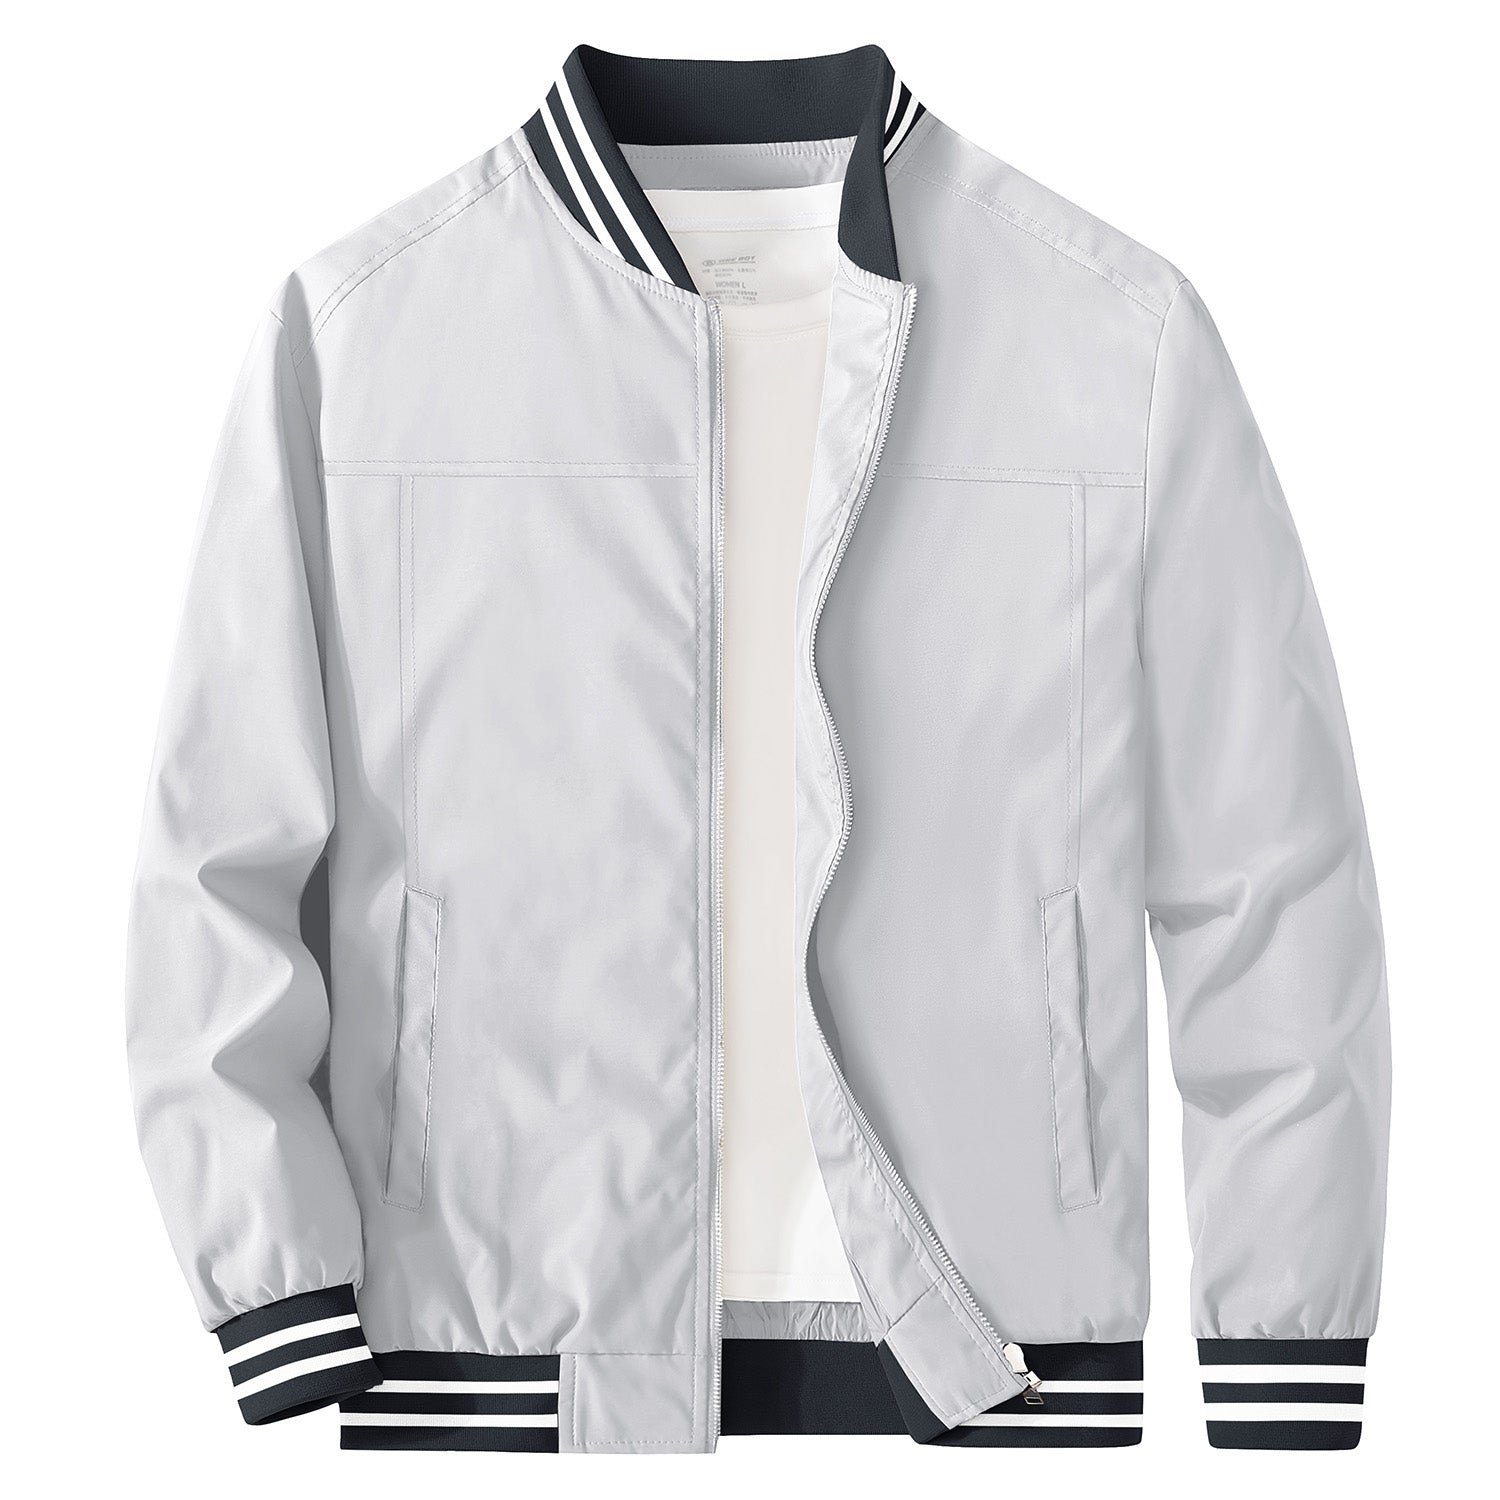 27 Best Bomber Jackets For Men To Look Fly (Updated)